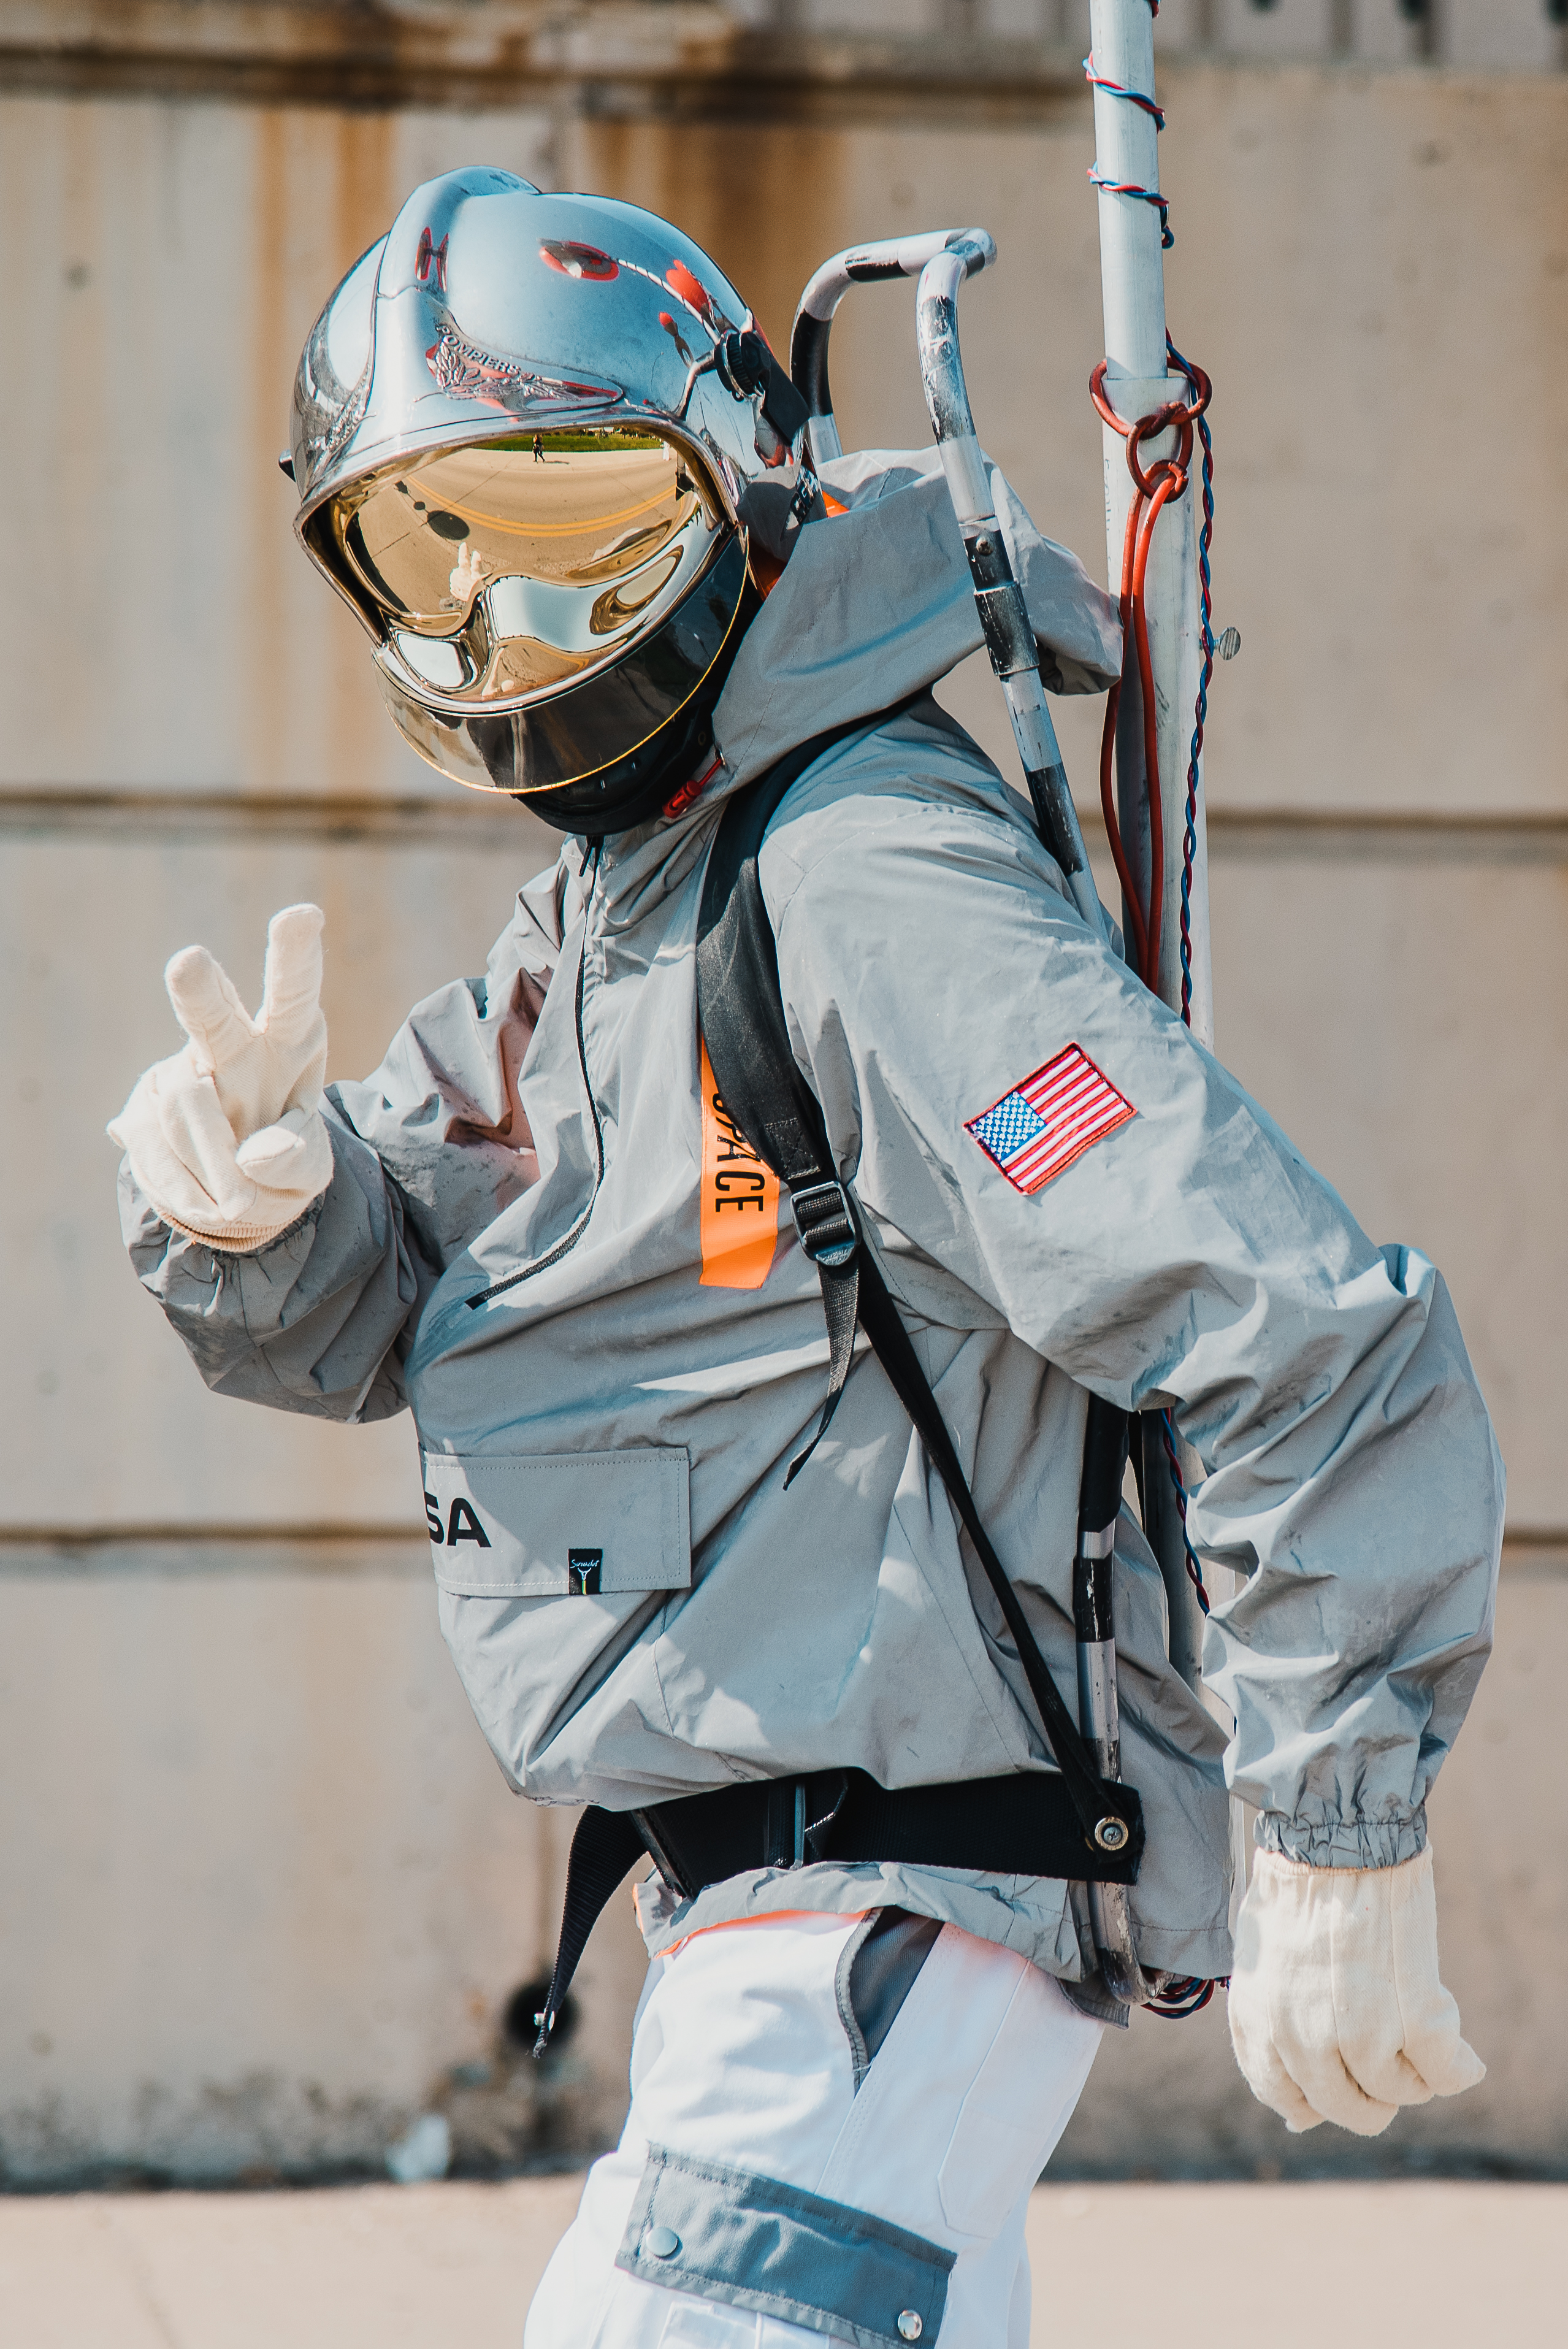 Image of a person in an astronaut costume giving a peace sign to the camera.  